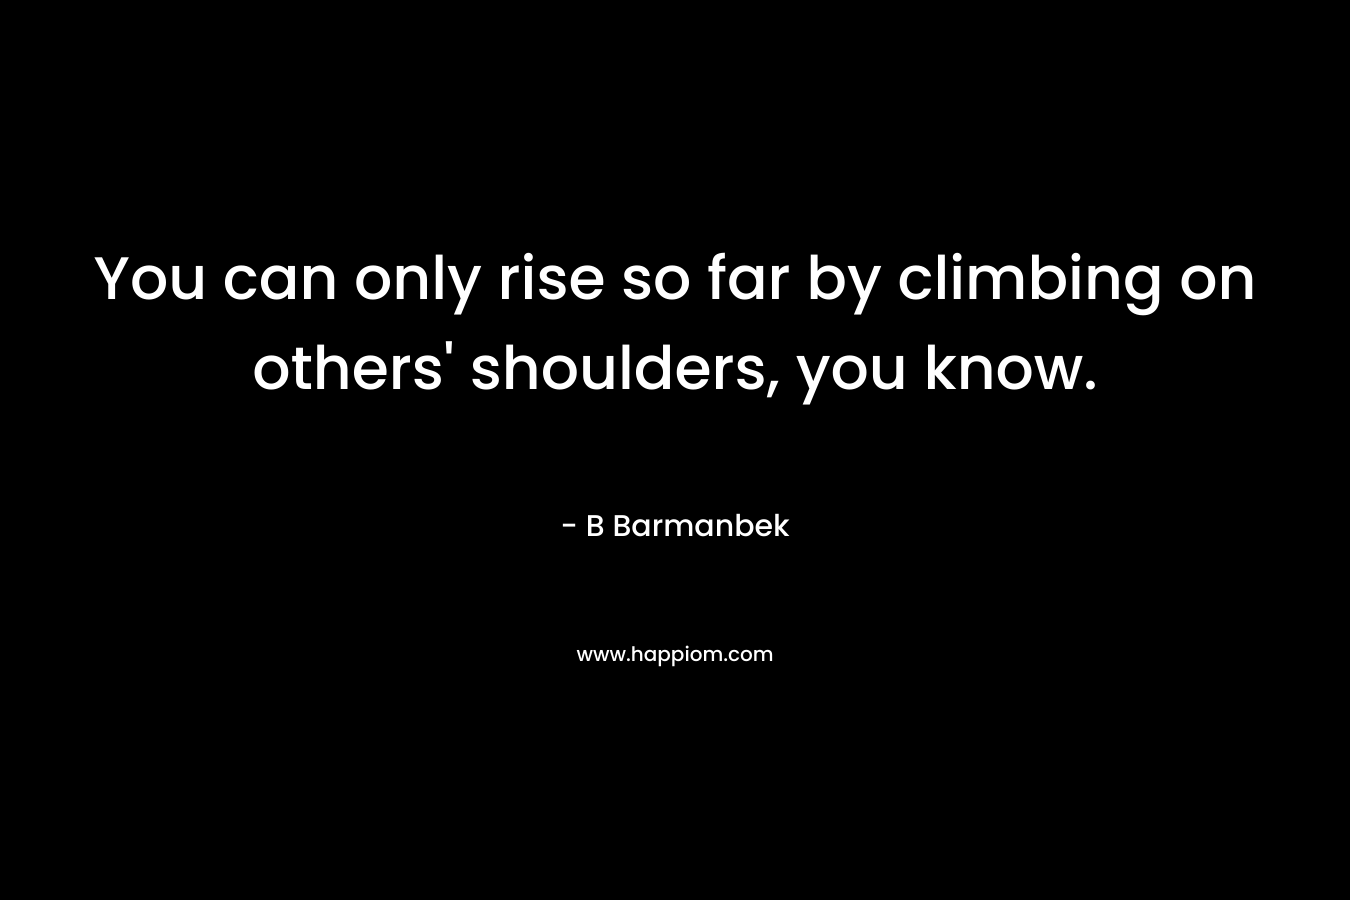 You can only rise so far by climbing on others’ shoulders, you know. – B Barmanbek